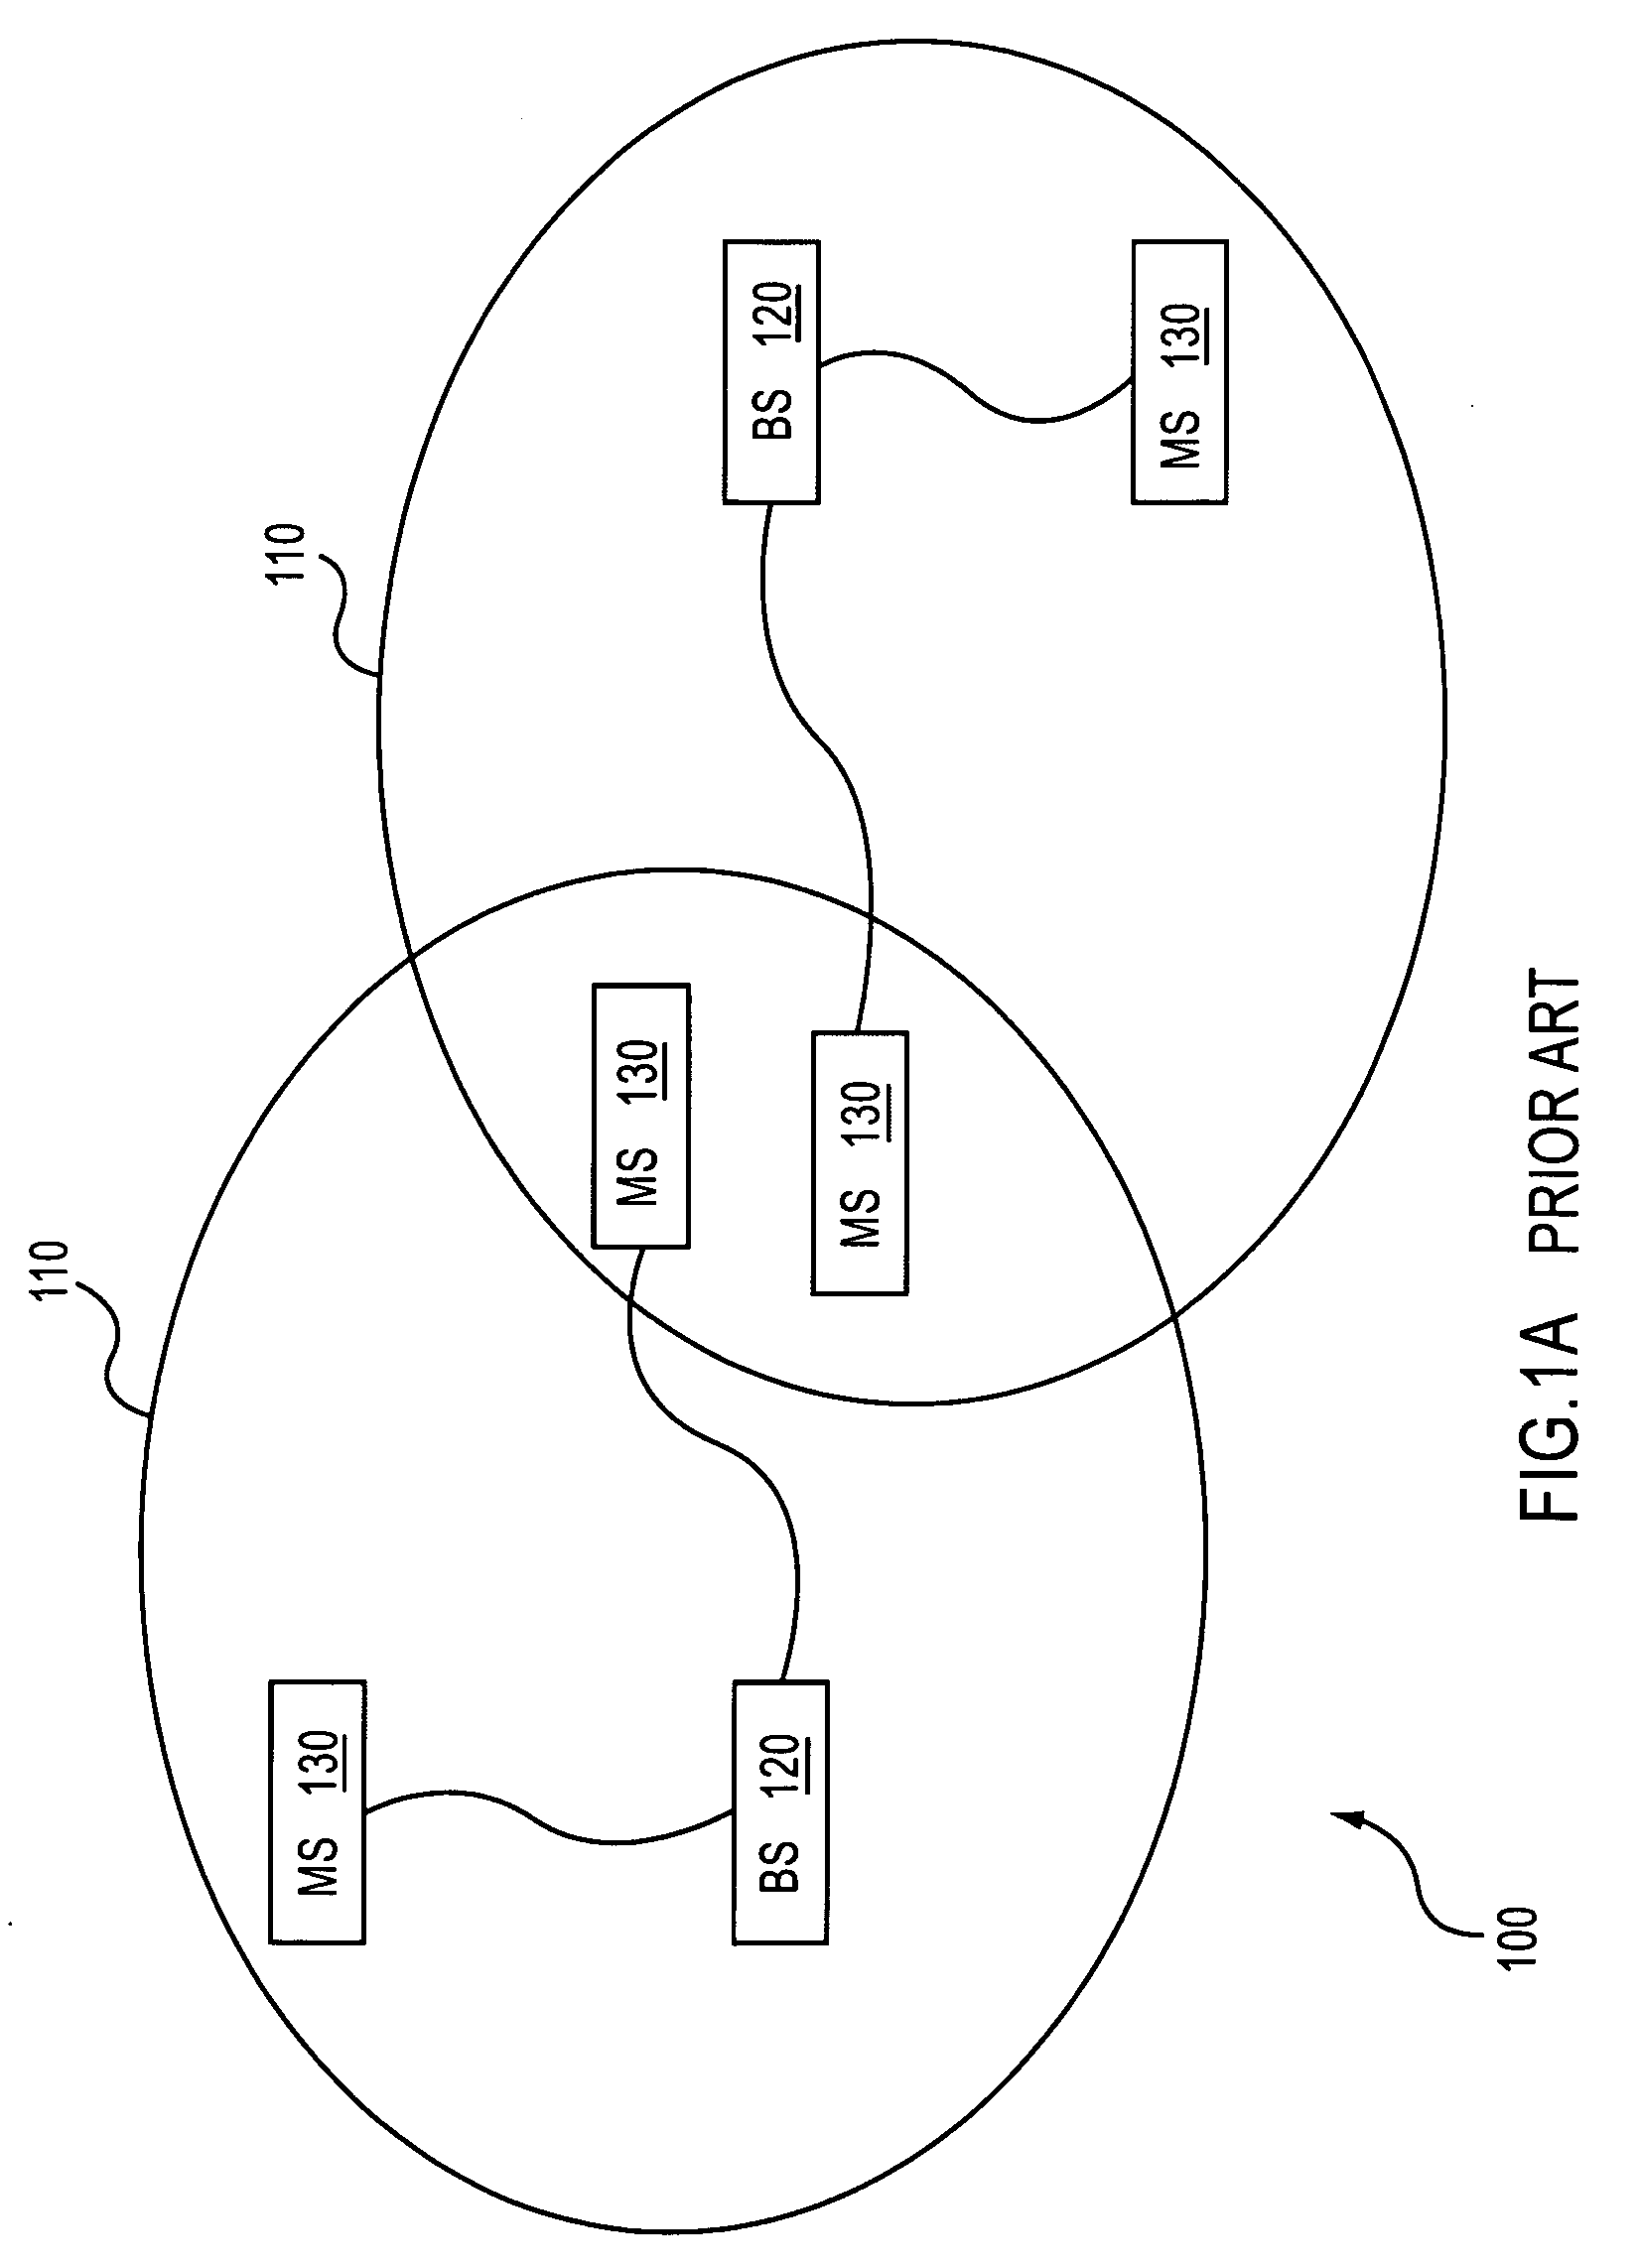 Method and apparatus to reduce system overhead